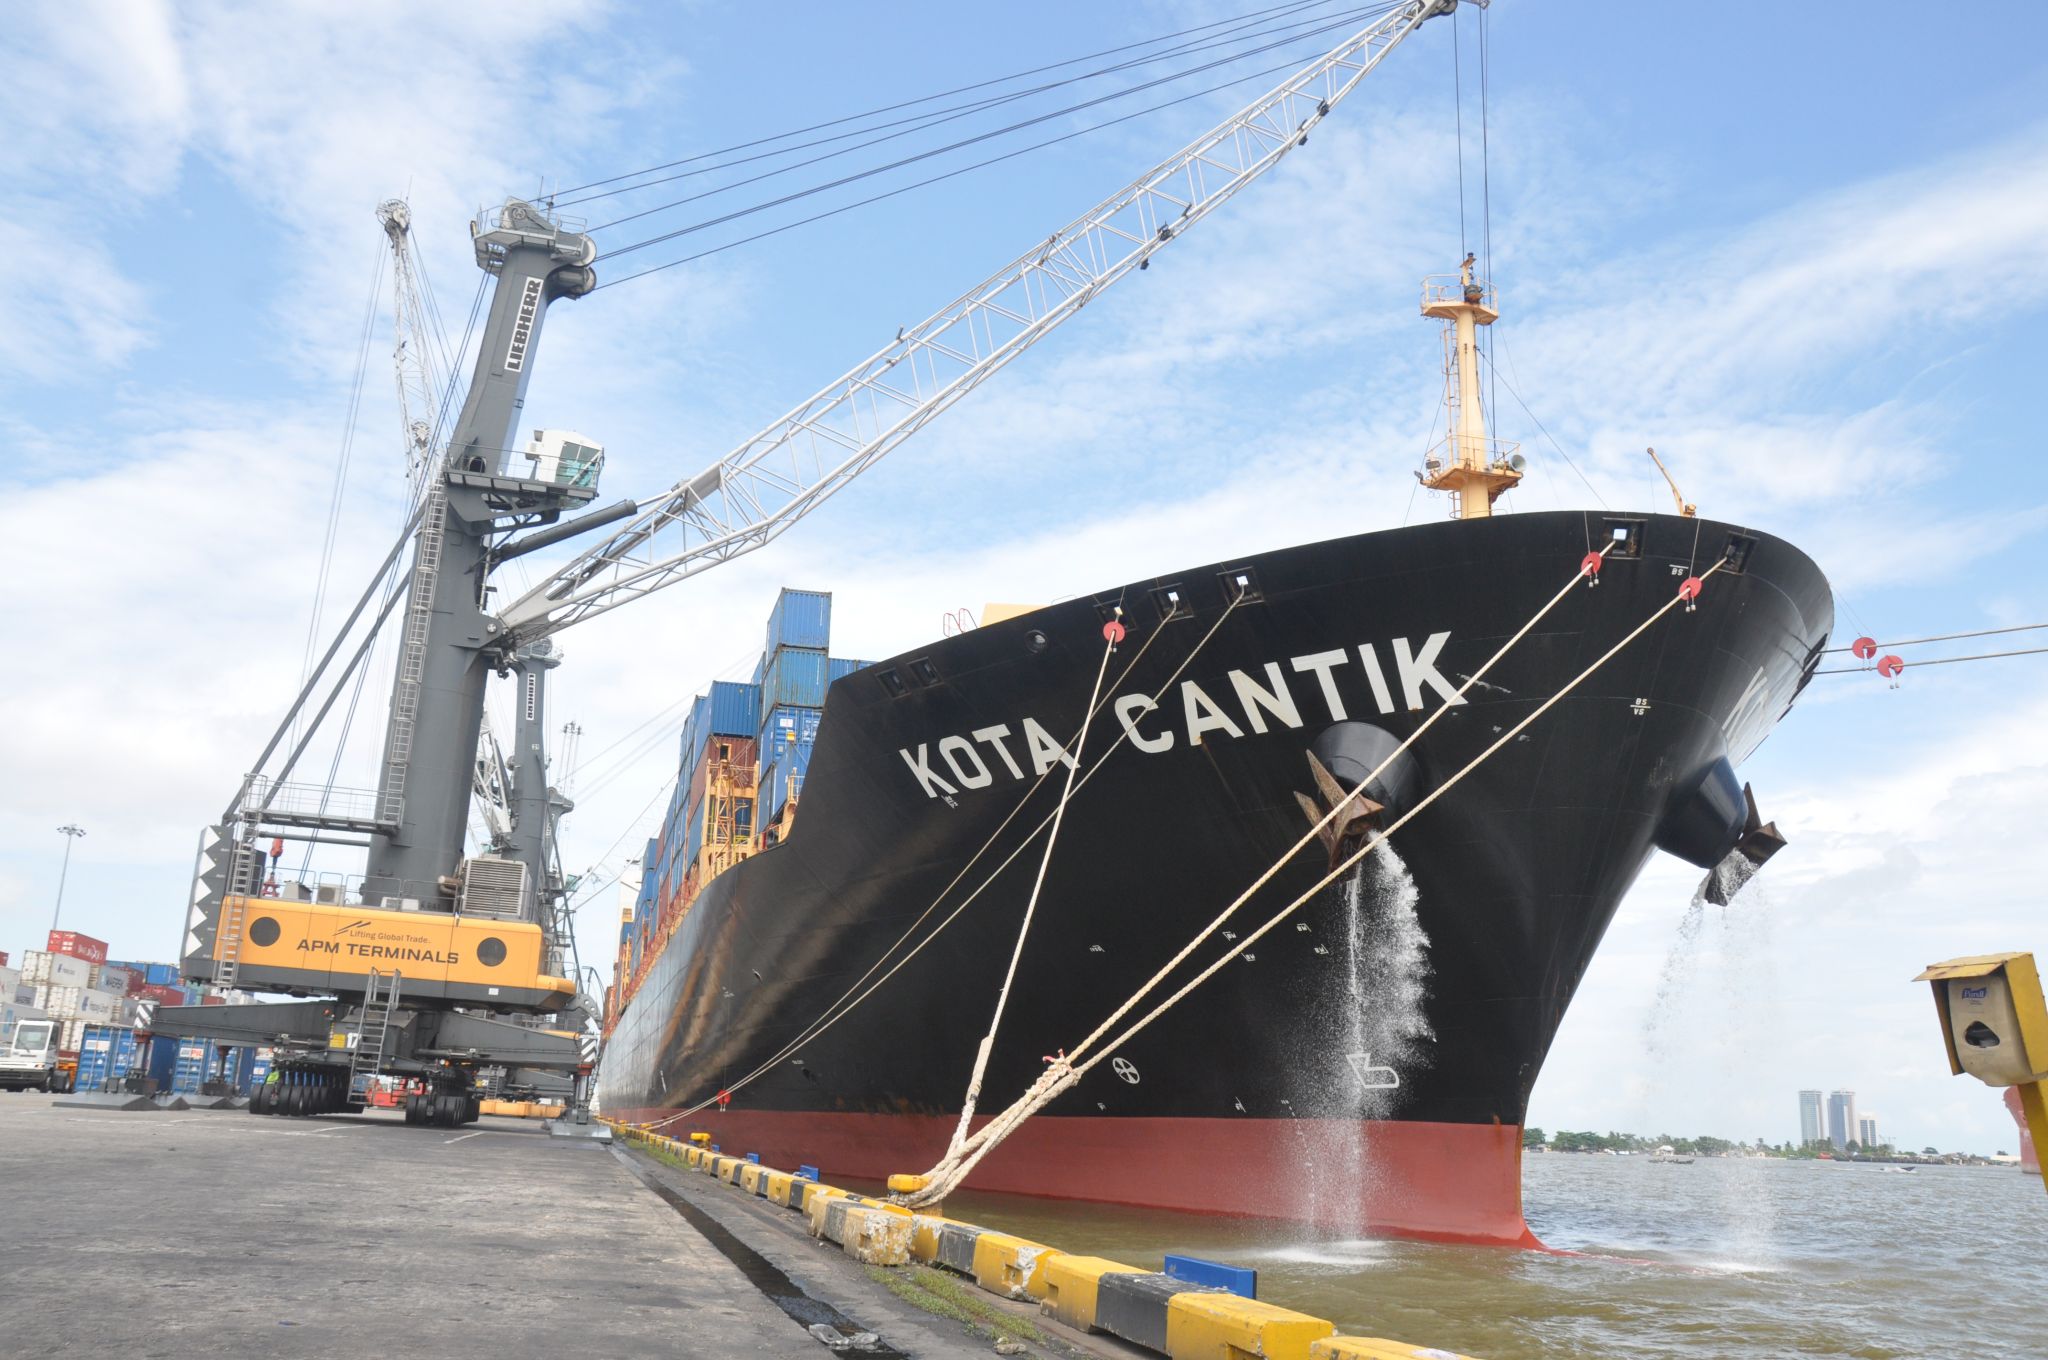 The largest containership to Berth in Apapa, Nigeria